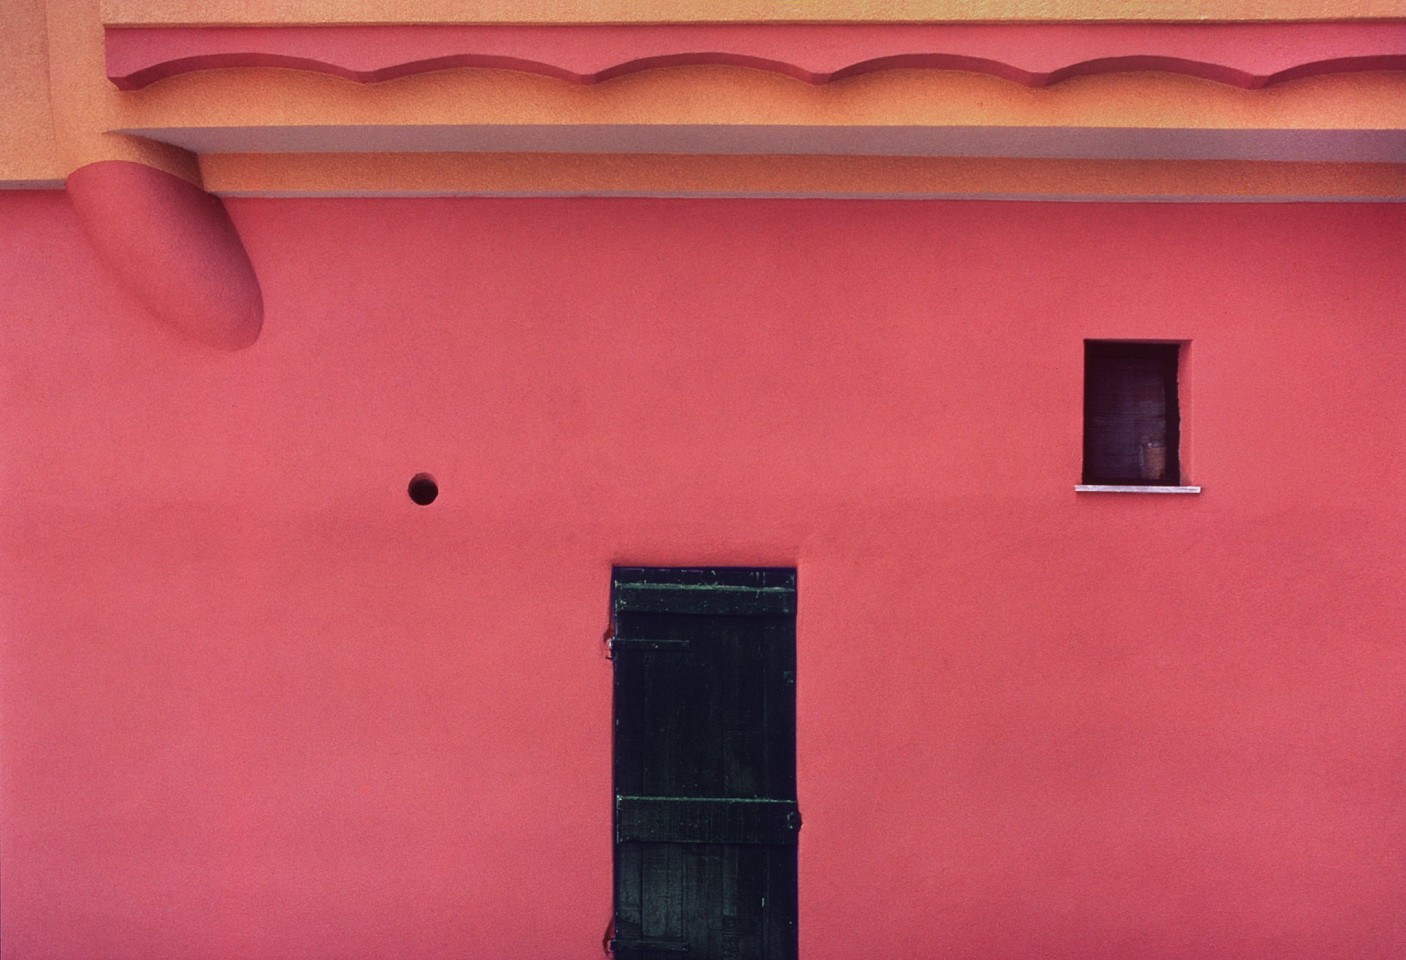 Jeffrey Becom, Pink Wall, Monterosso, Italy, 1990
Ilfochrome print, 20 x 30 in.
Signed, dated, titled & numbered in edition of 25, © Jeffrey Becom
$2,850